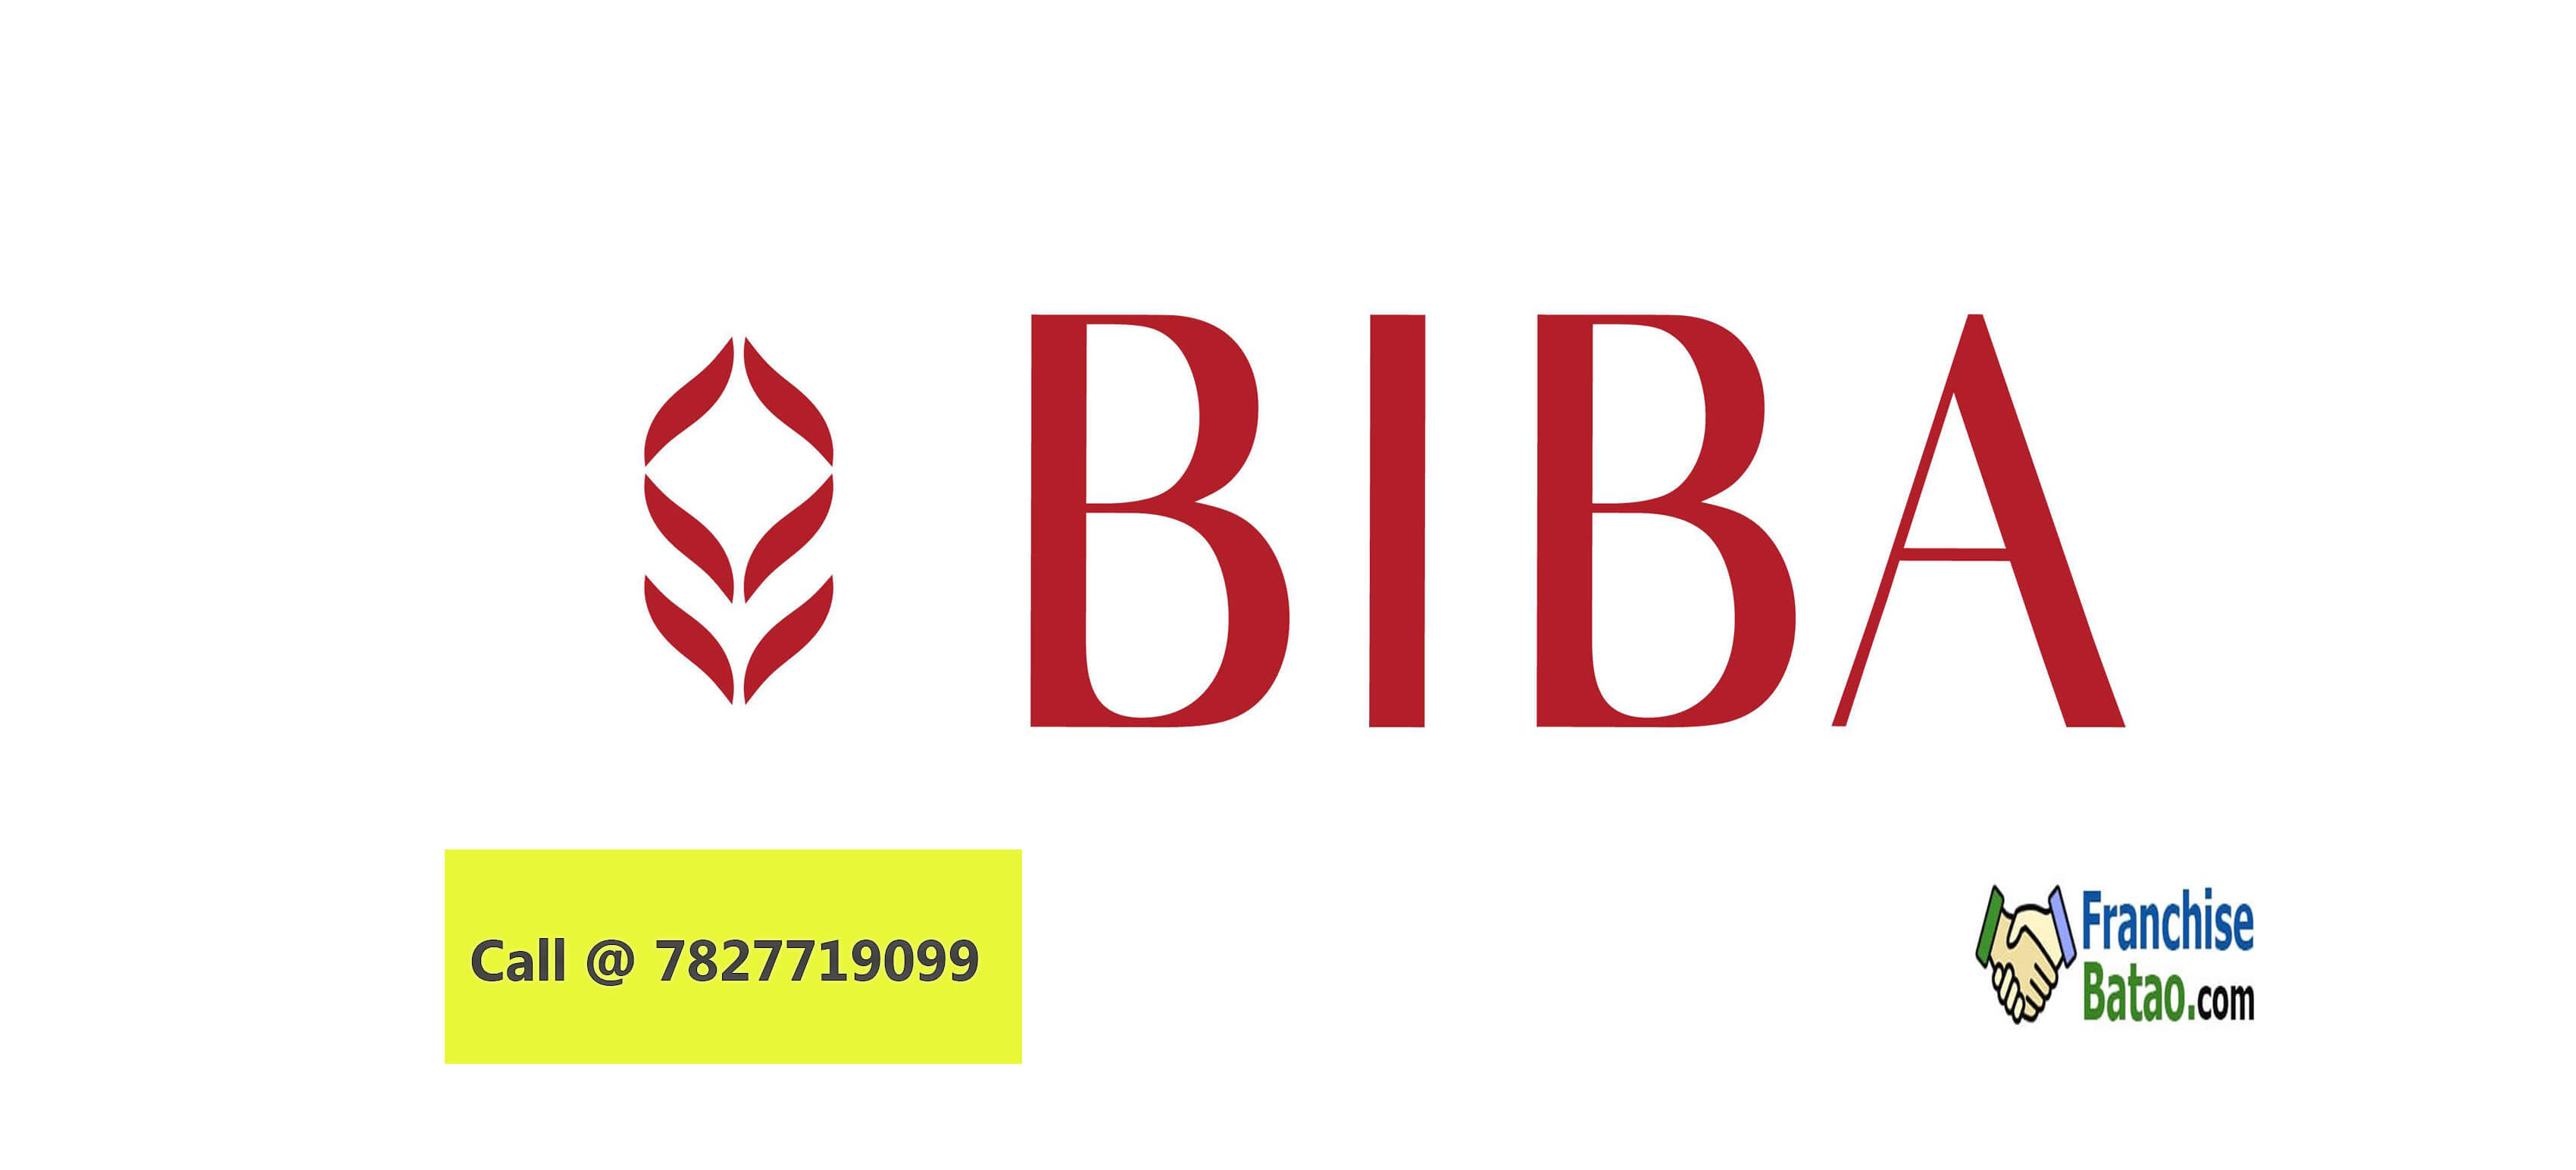 BIBA franchise available in India